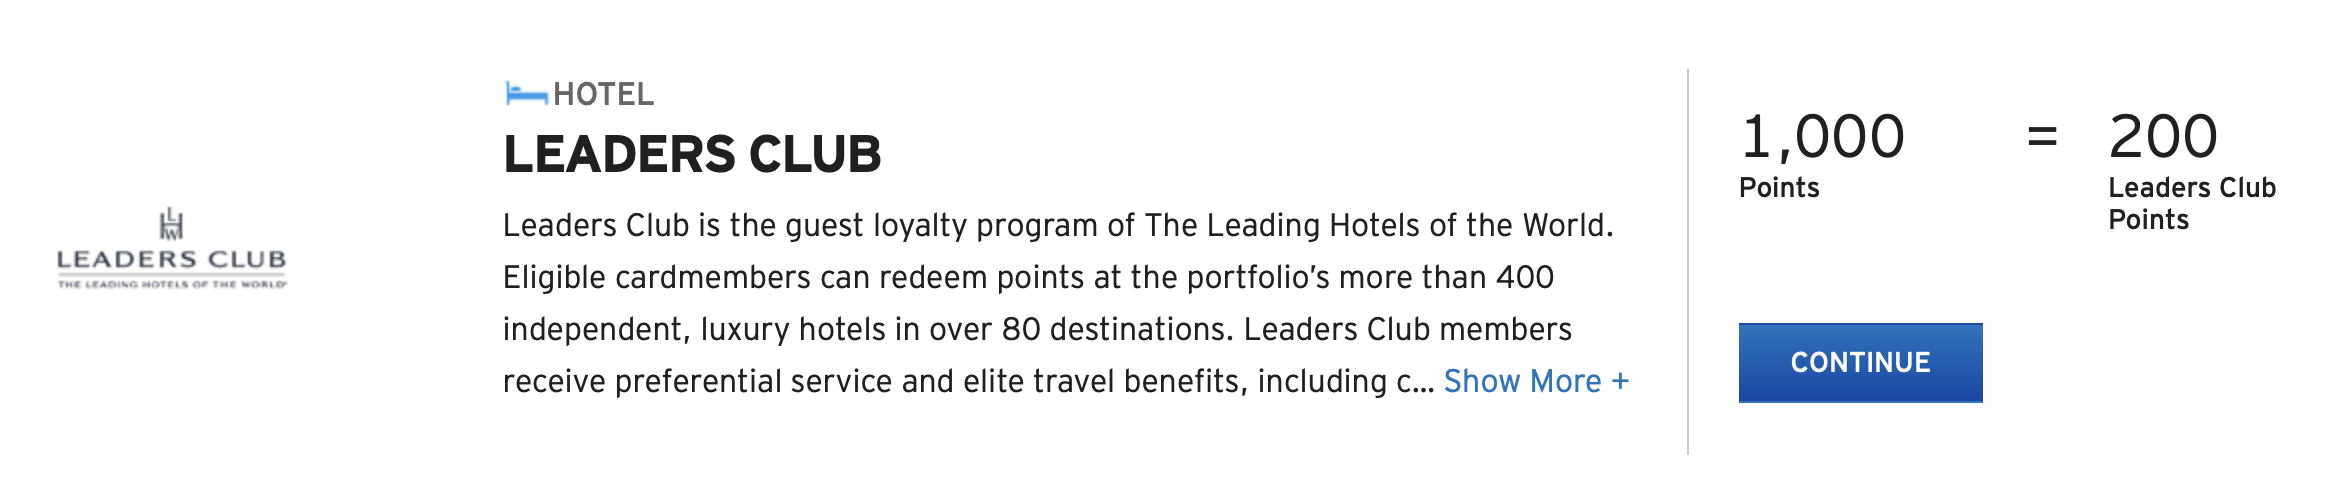 citi leading hotels of the world leaders club transfer